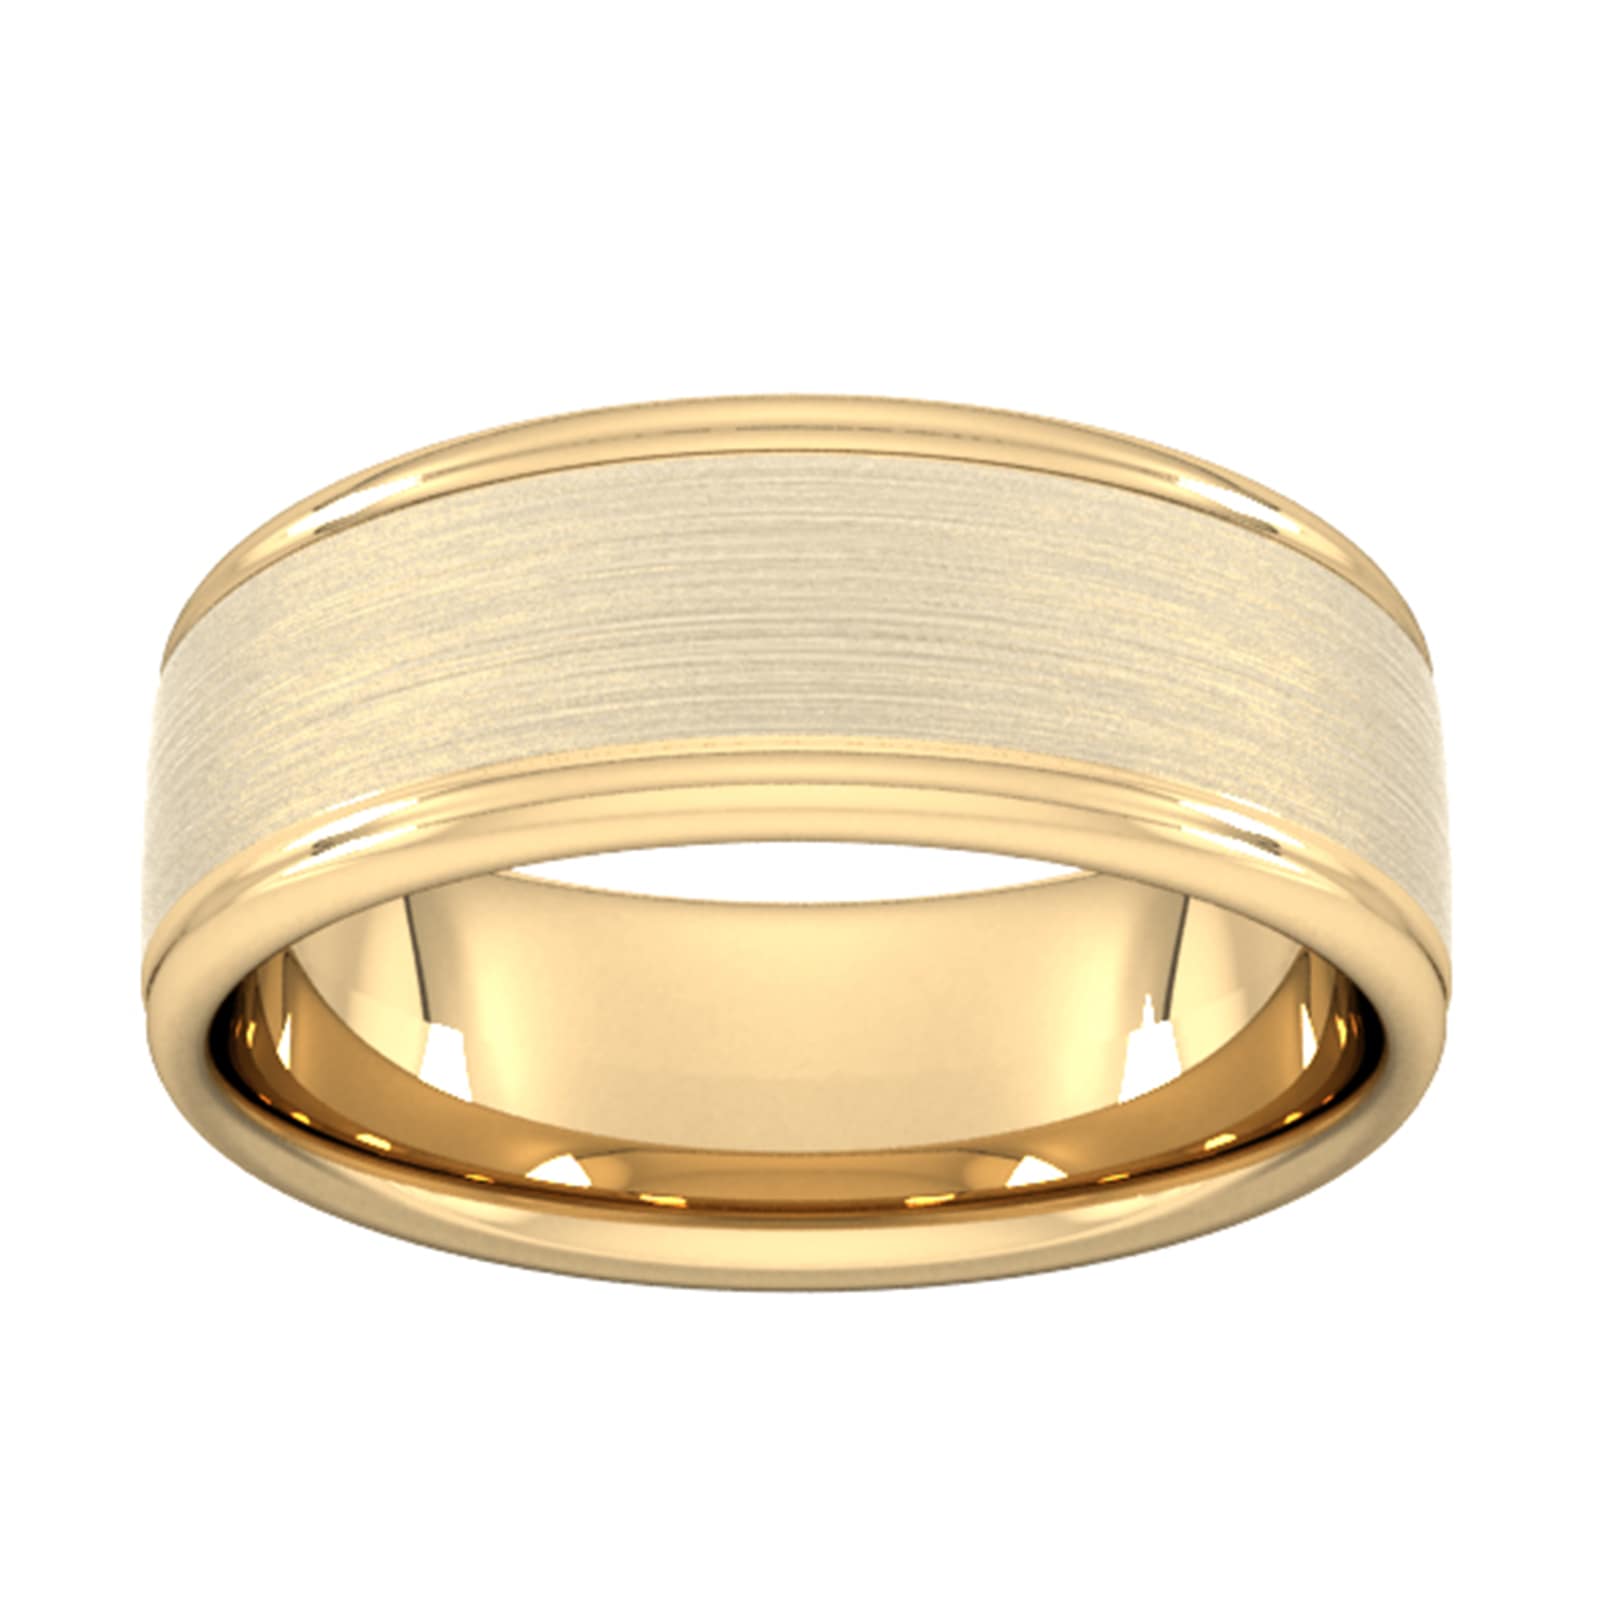 8mm Flat Court Heavy Matt Centre With Grooves Wedding Ring In 9 Carat Yellow Gold - Ring Size S